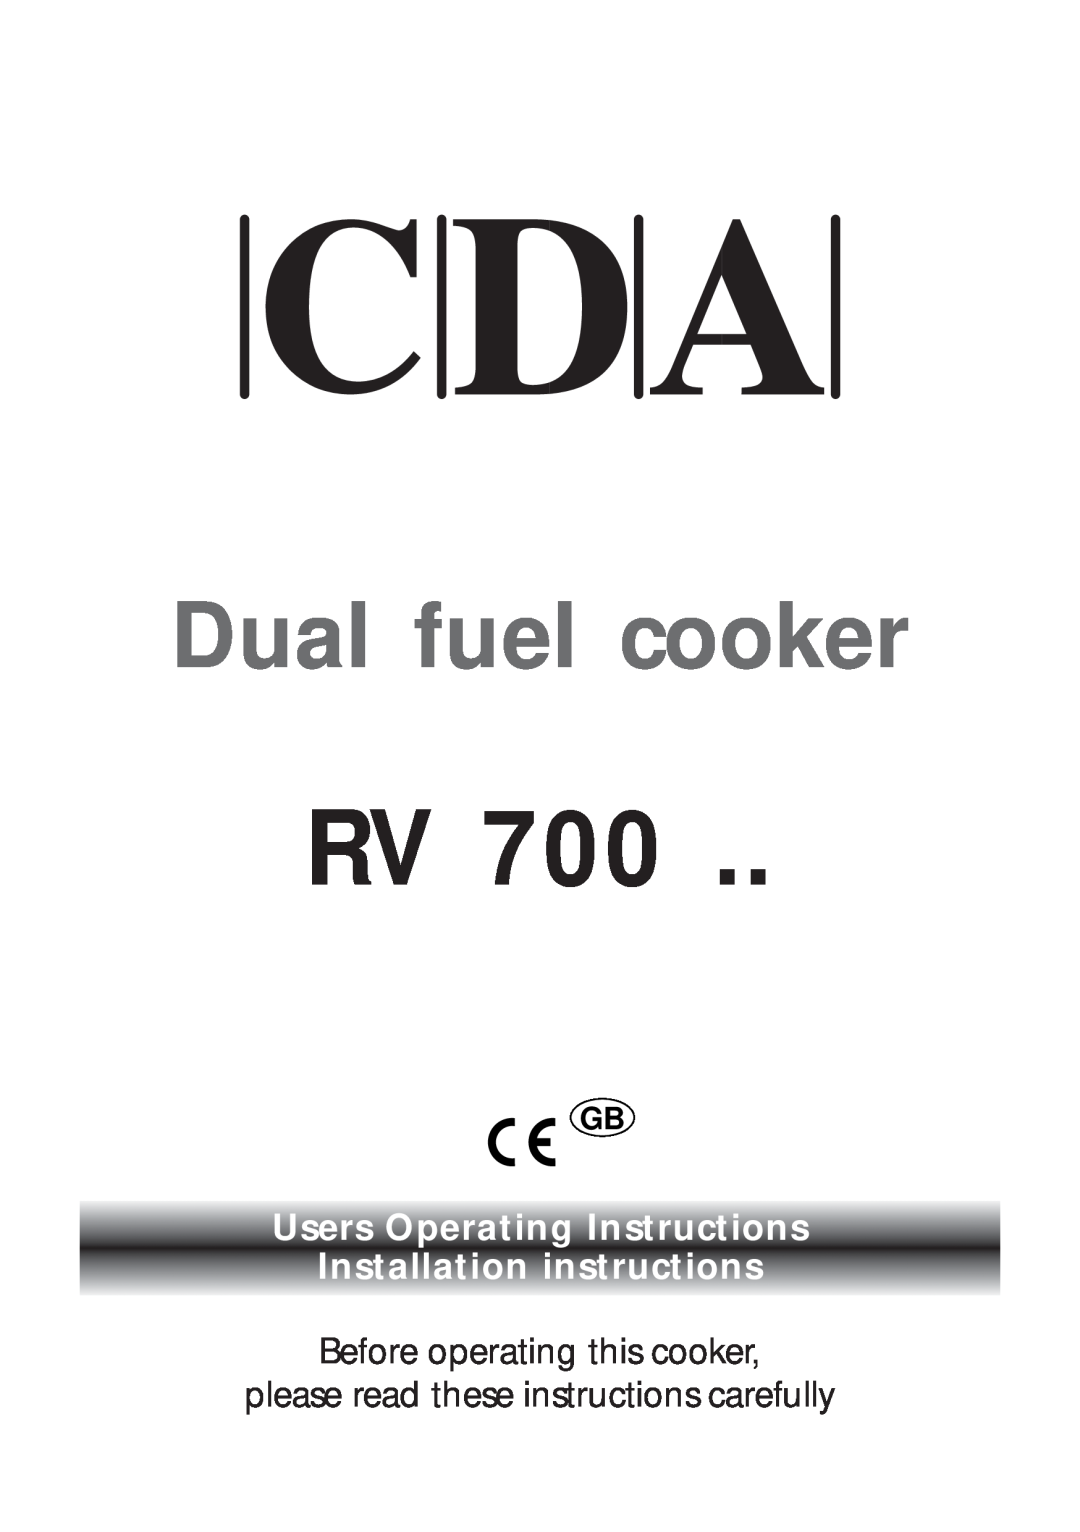 CDA RV 700 installation instructions Before operating this cooker please read these instructions carefully 